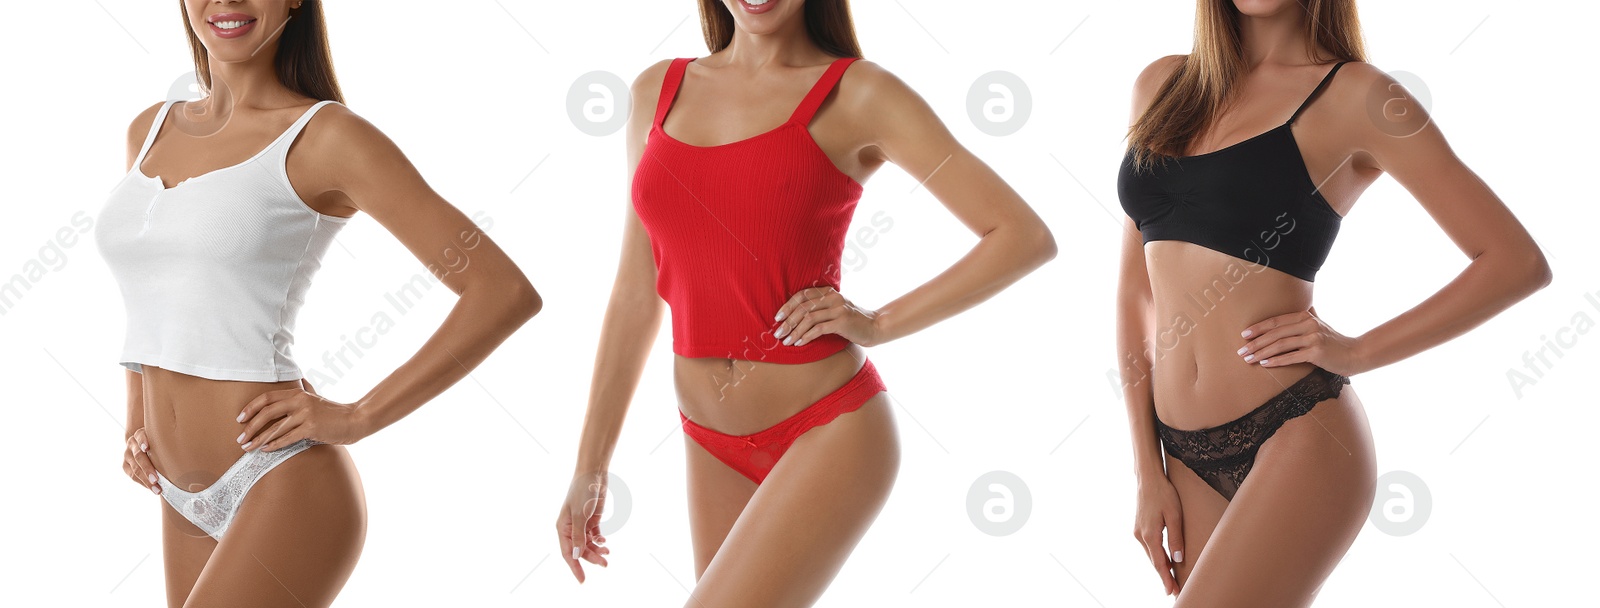 Image of Collage with photos of women wearing panties and tops on white background. Banner design